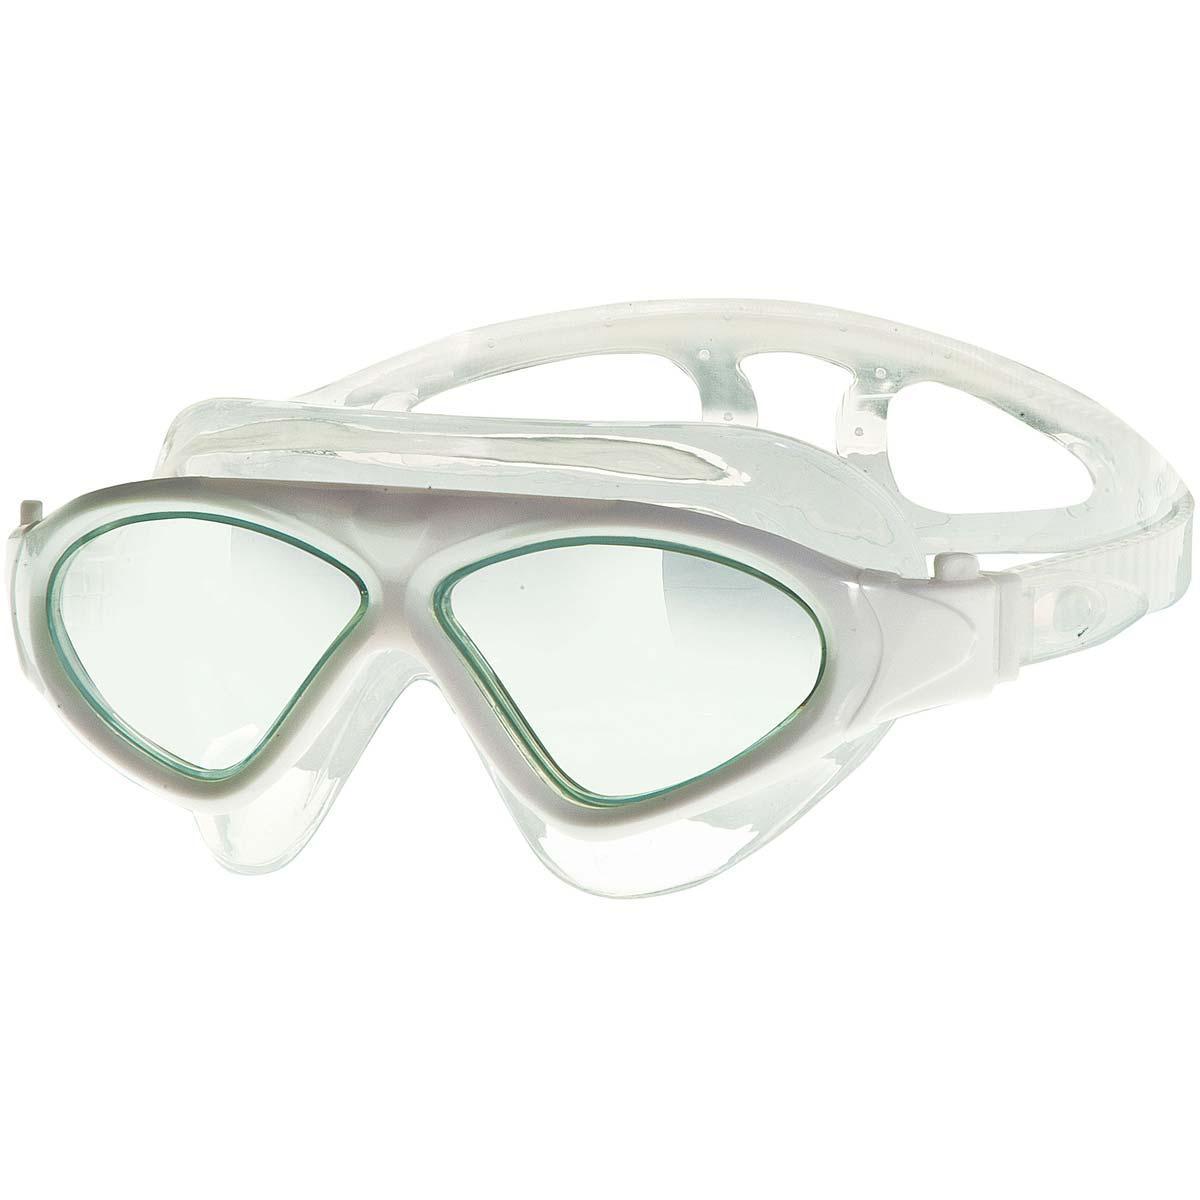 Foto Adult Zoggs Tri Vision Mask White/Clear Lens foto 720398